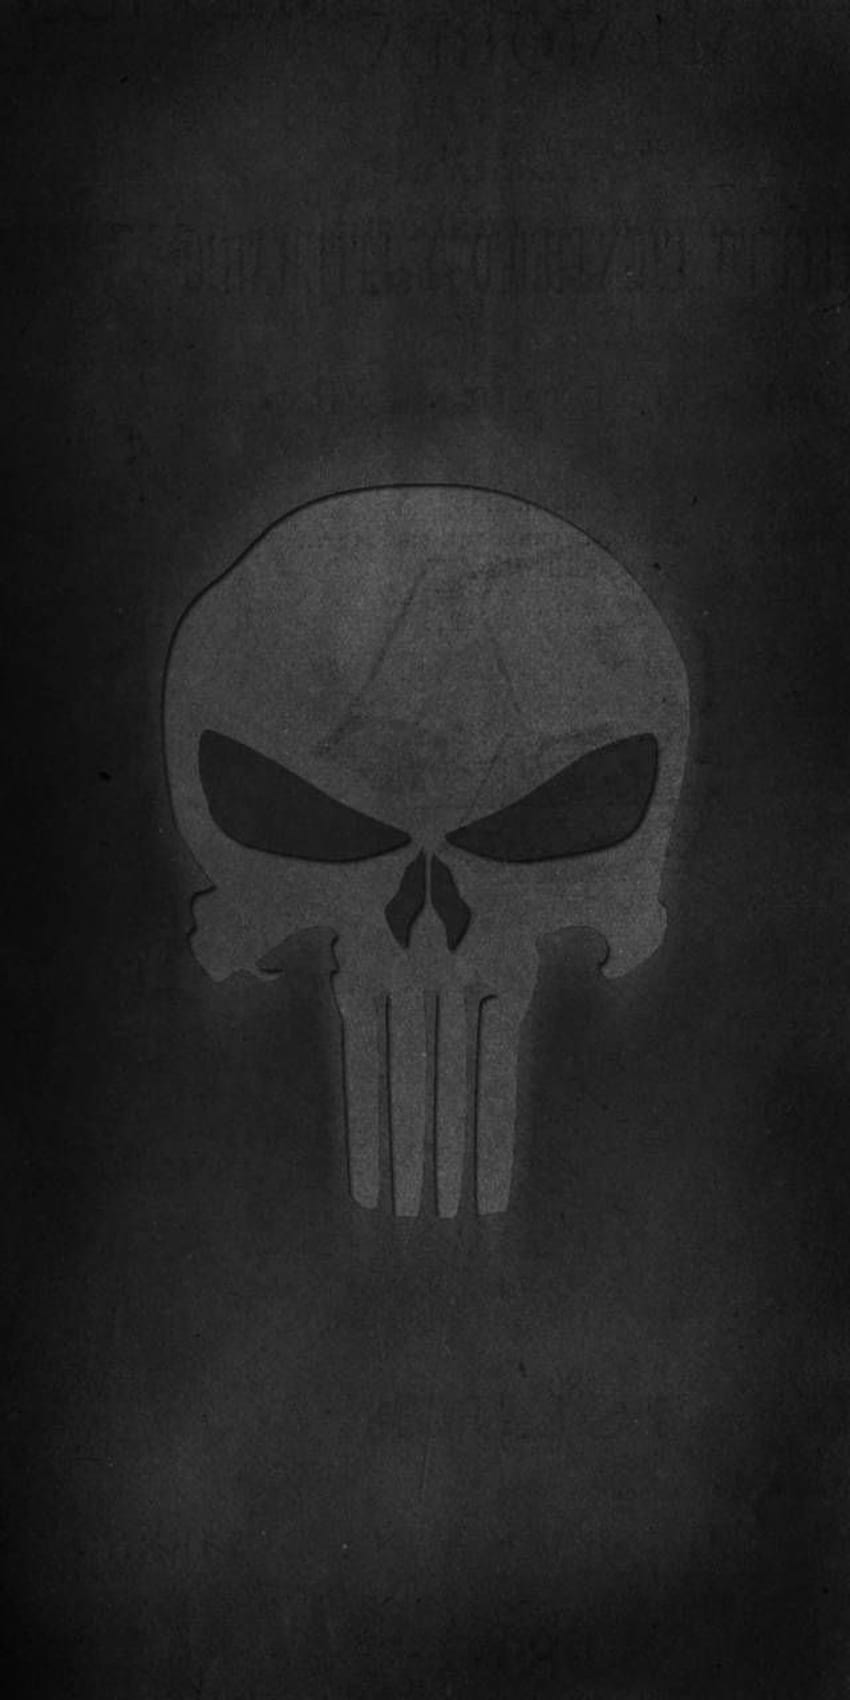 PUNISHER by jmbarr710, punisher iphone HD phone wallpaper